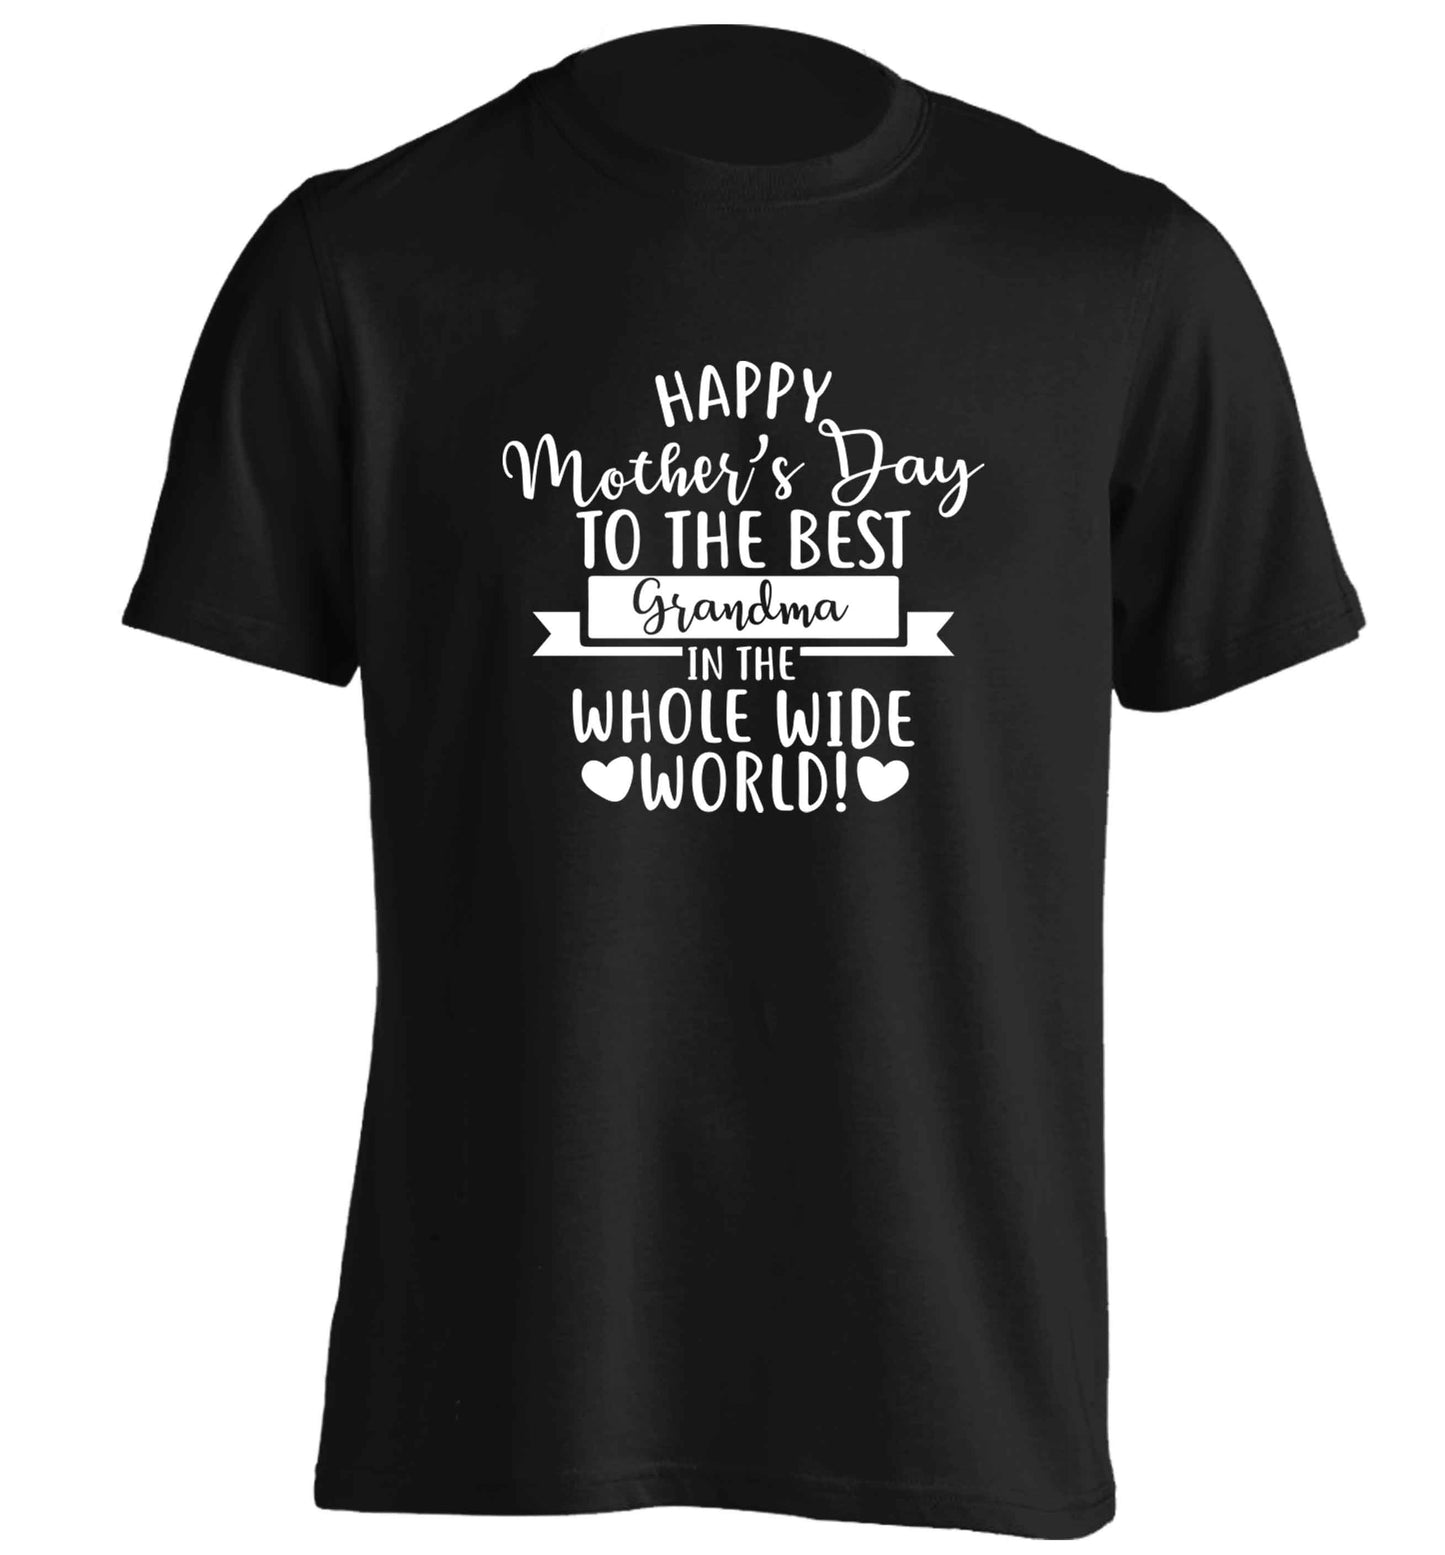 Happy mother's day to the best grandma in the world adults unisex black Tshirt 2XL